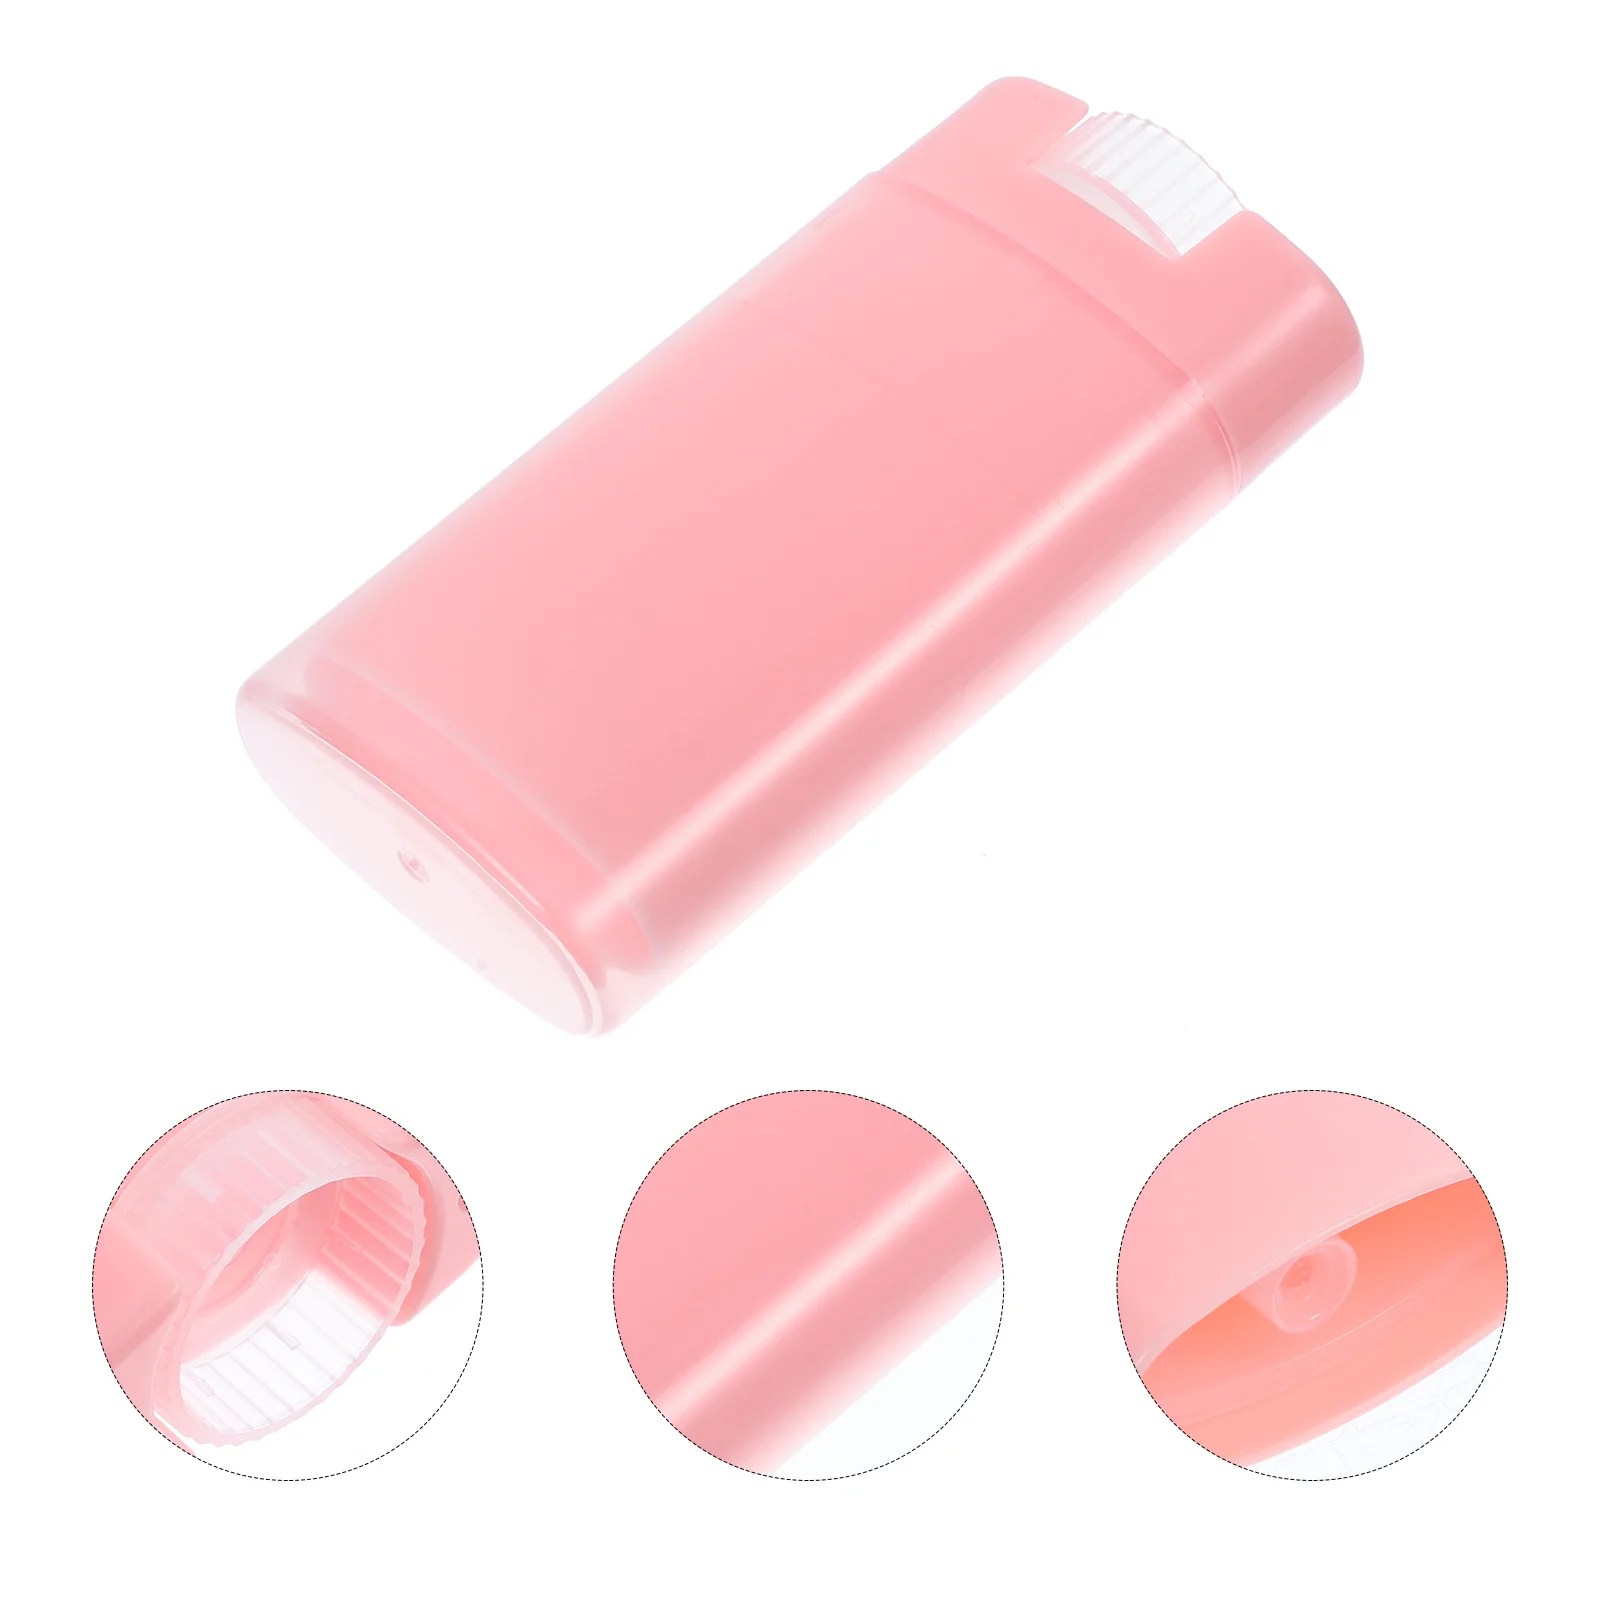 

15Pcs Lip Balm Containers DIY Lipstick Holders Empty Lip Gloss Tubes Portable Lip Gloss Containers